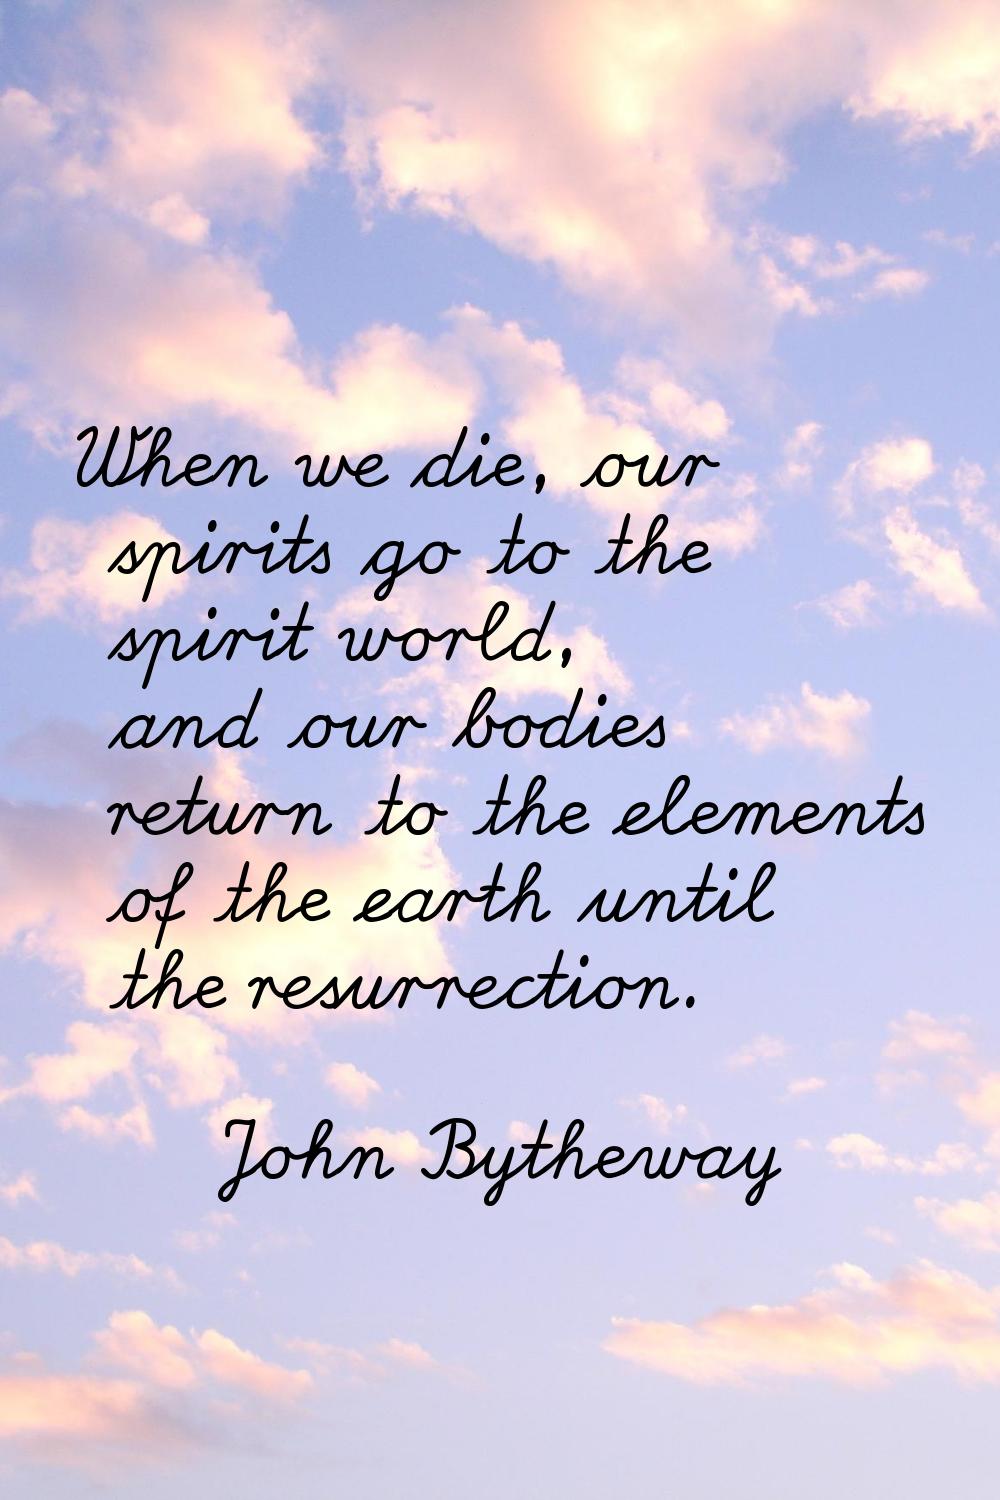 When we die, our spirits go to the spirit world, and our bodies return to the elements of the earth